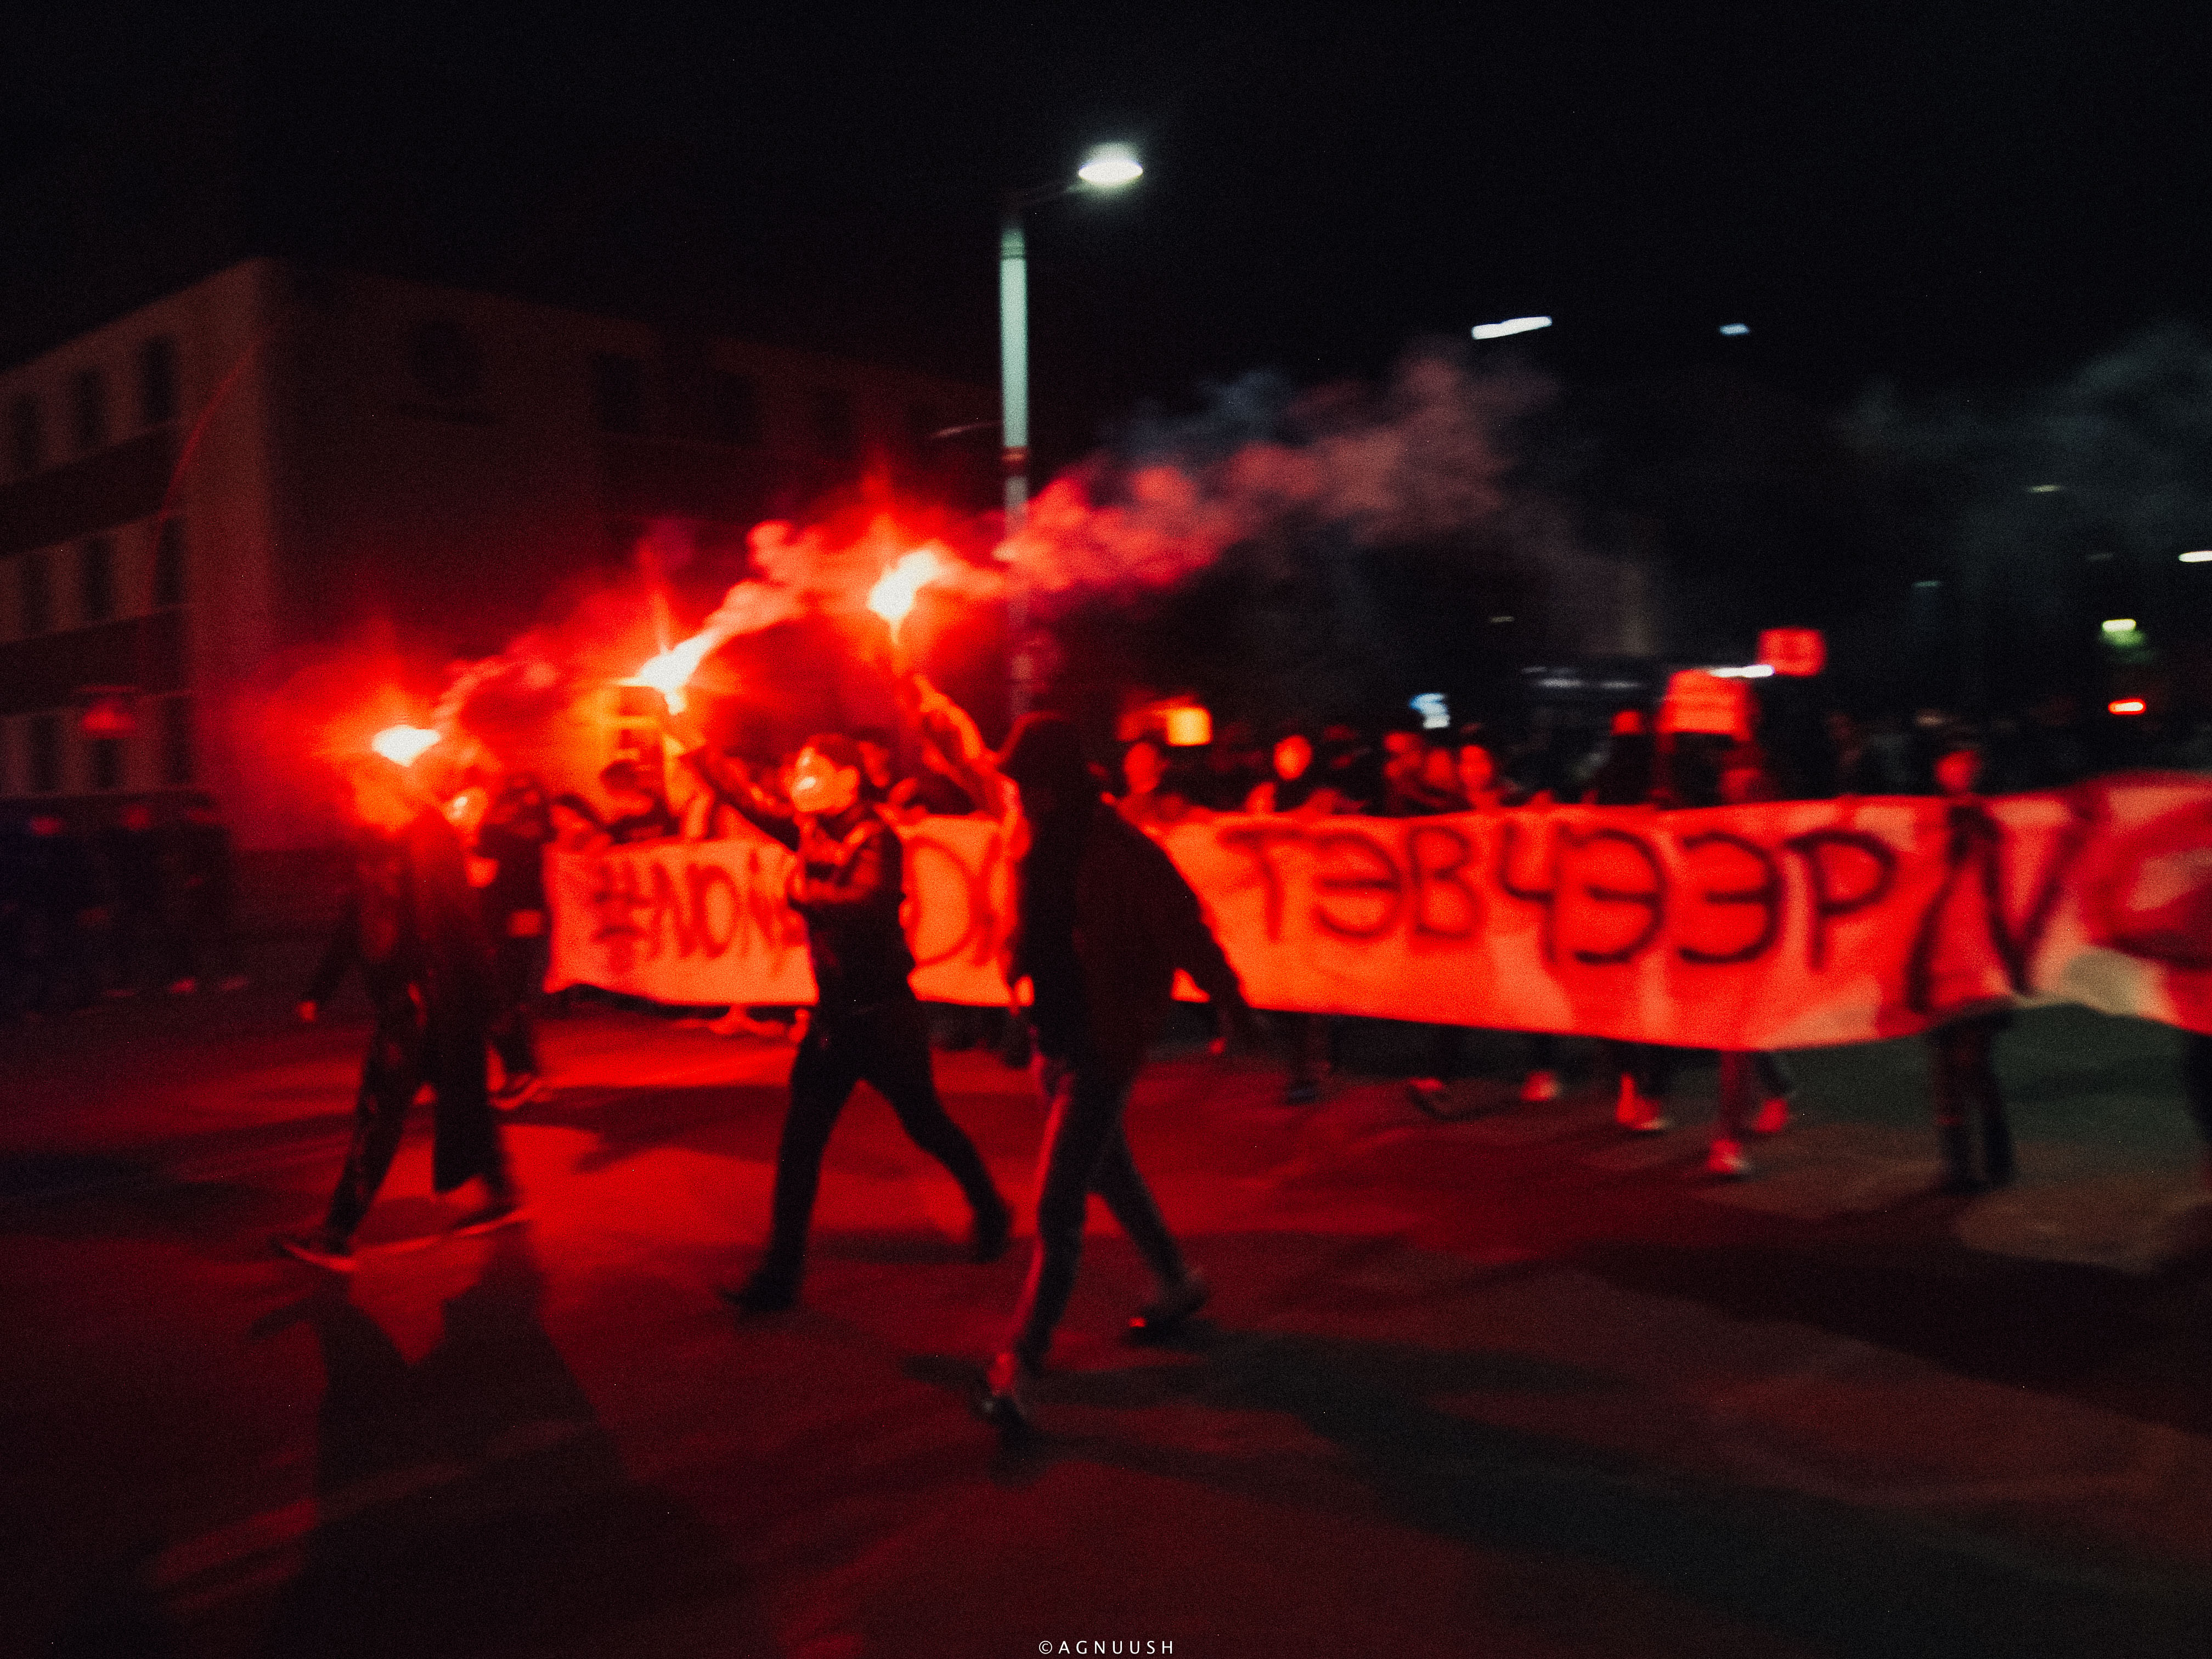 Large protest banner stretched across a road and lit under red flares.